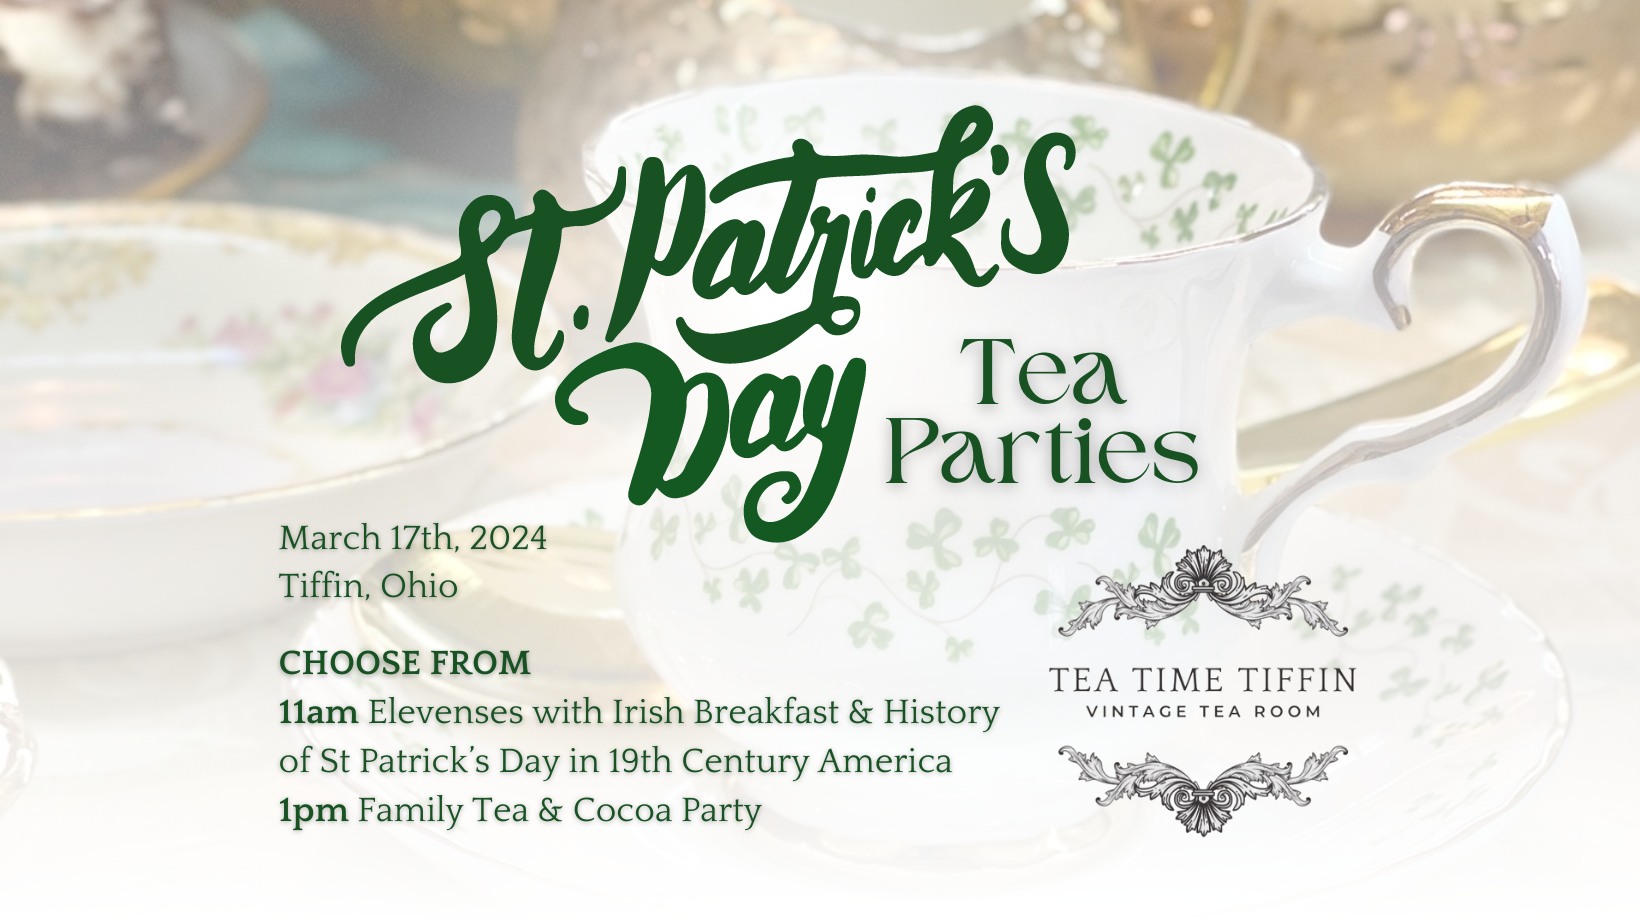 St. Patrick's Day Tea & Cocoa Parties